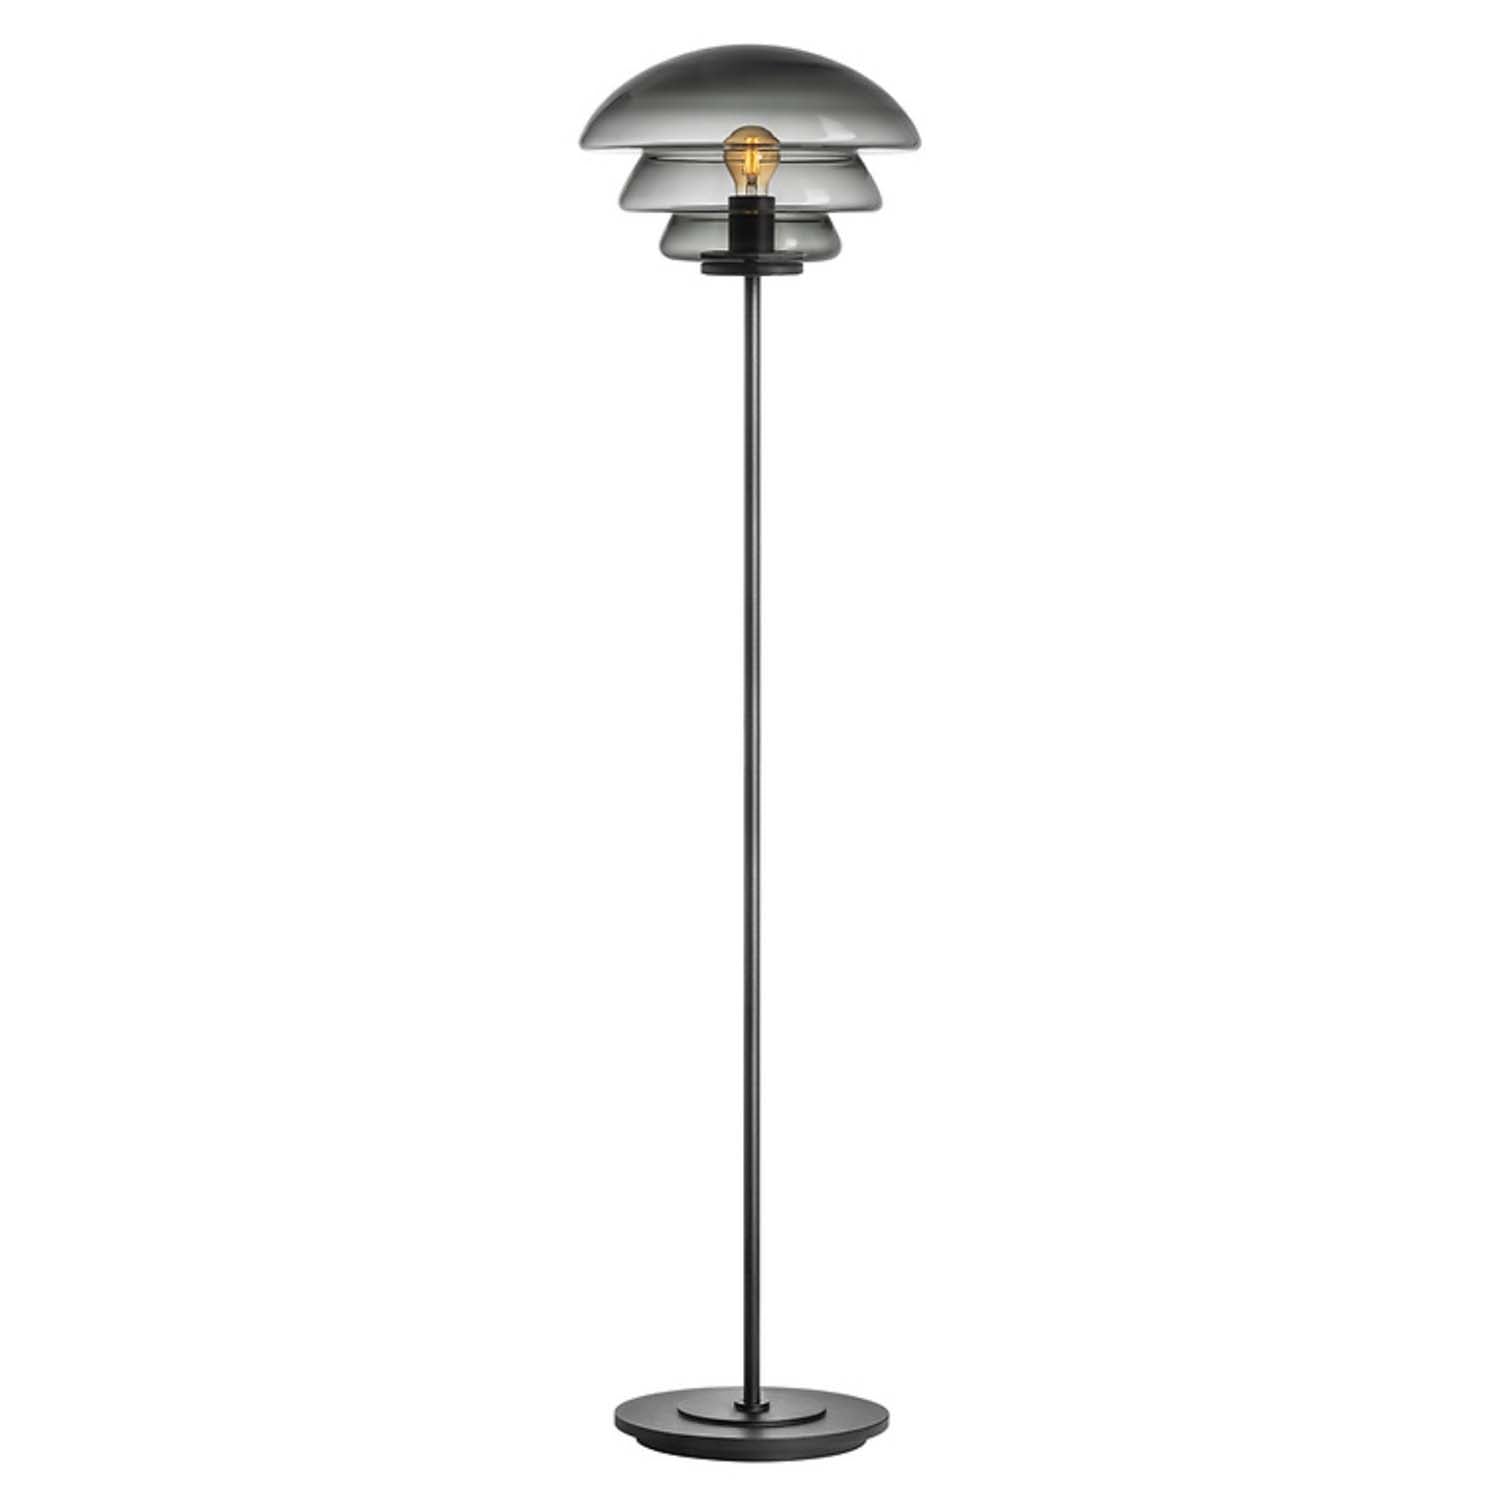 ARCHIVE 4006 - Handcrafted blown glass floor lamp